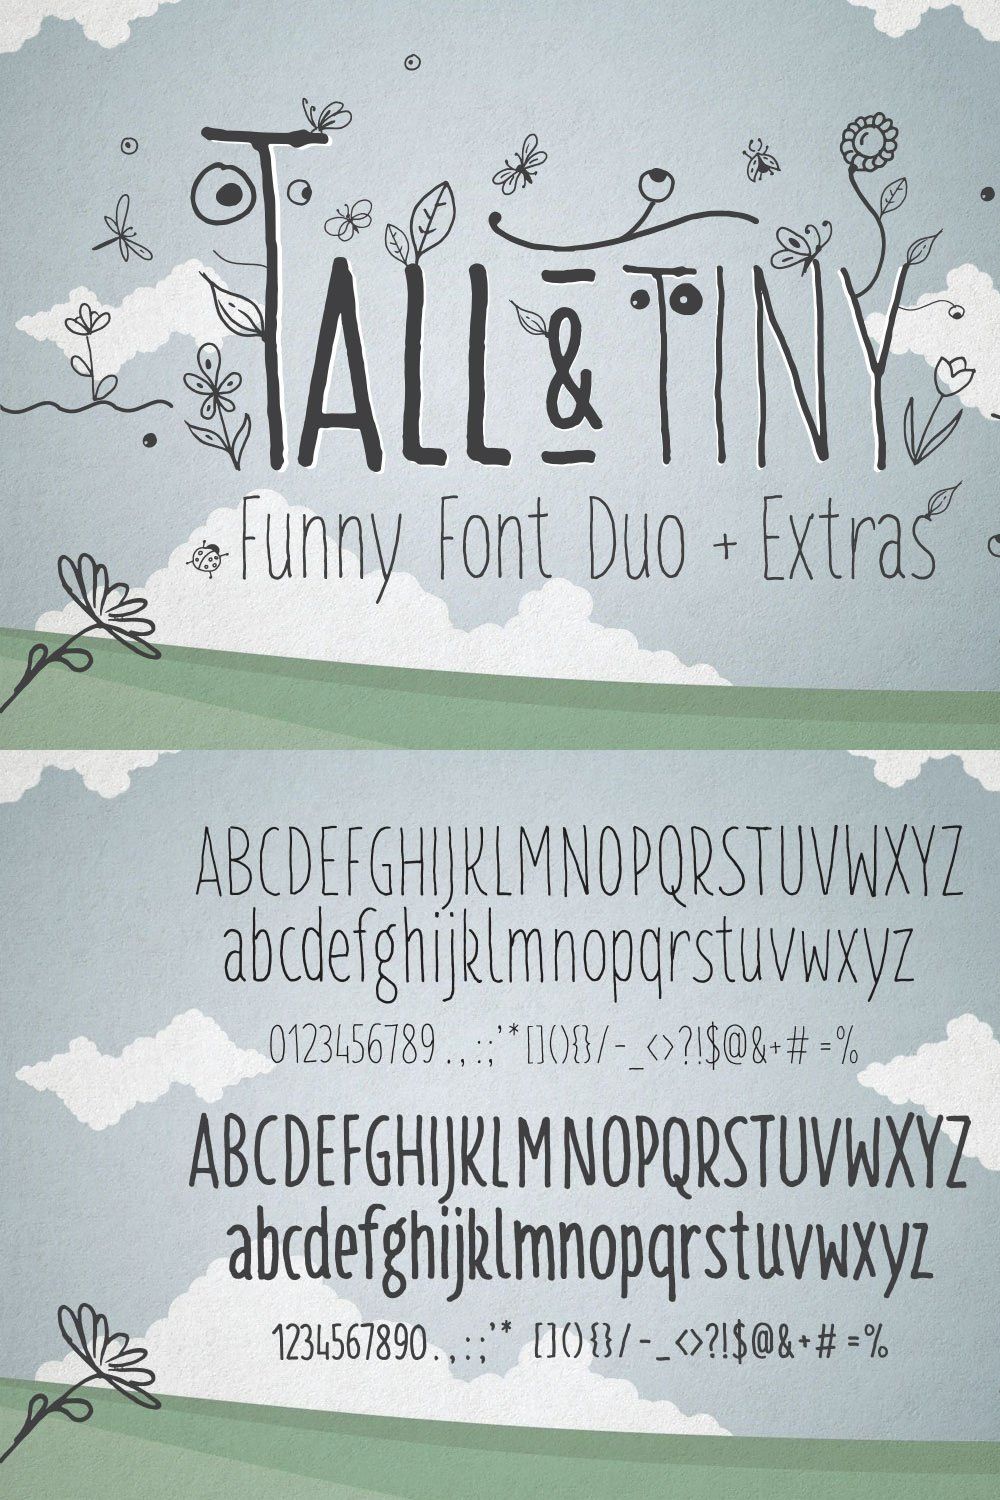 Tall & Tiny Font Duo pinterest preview image.